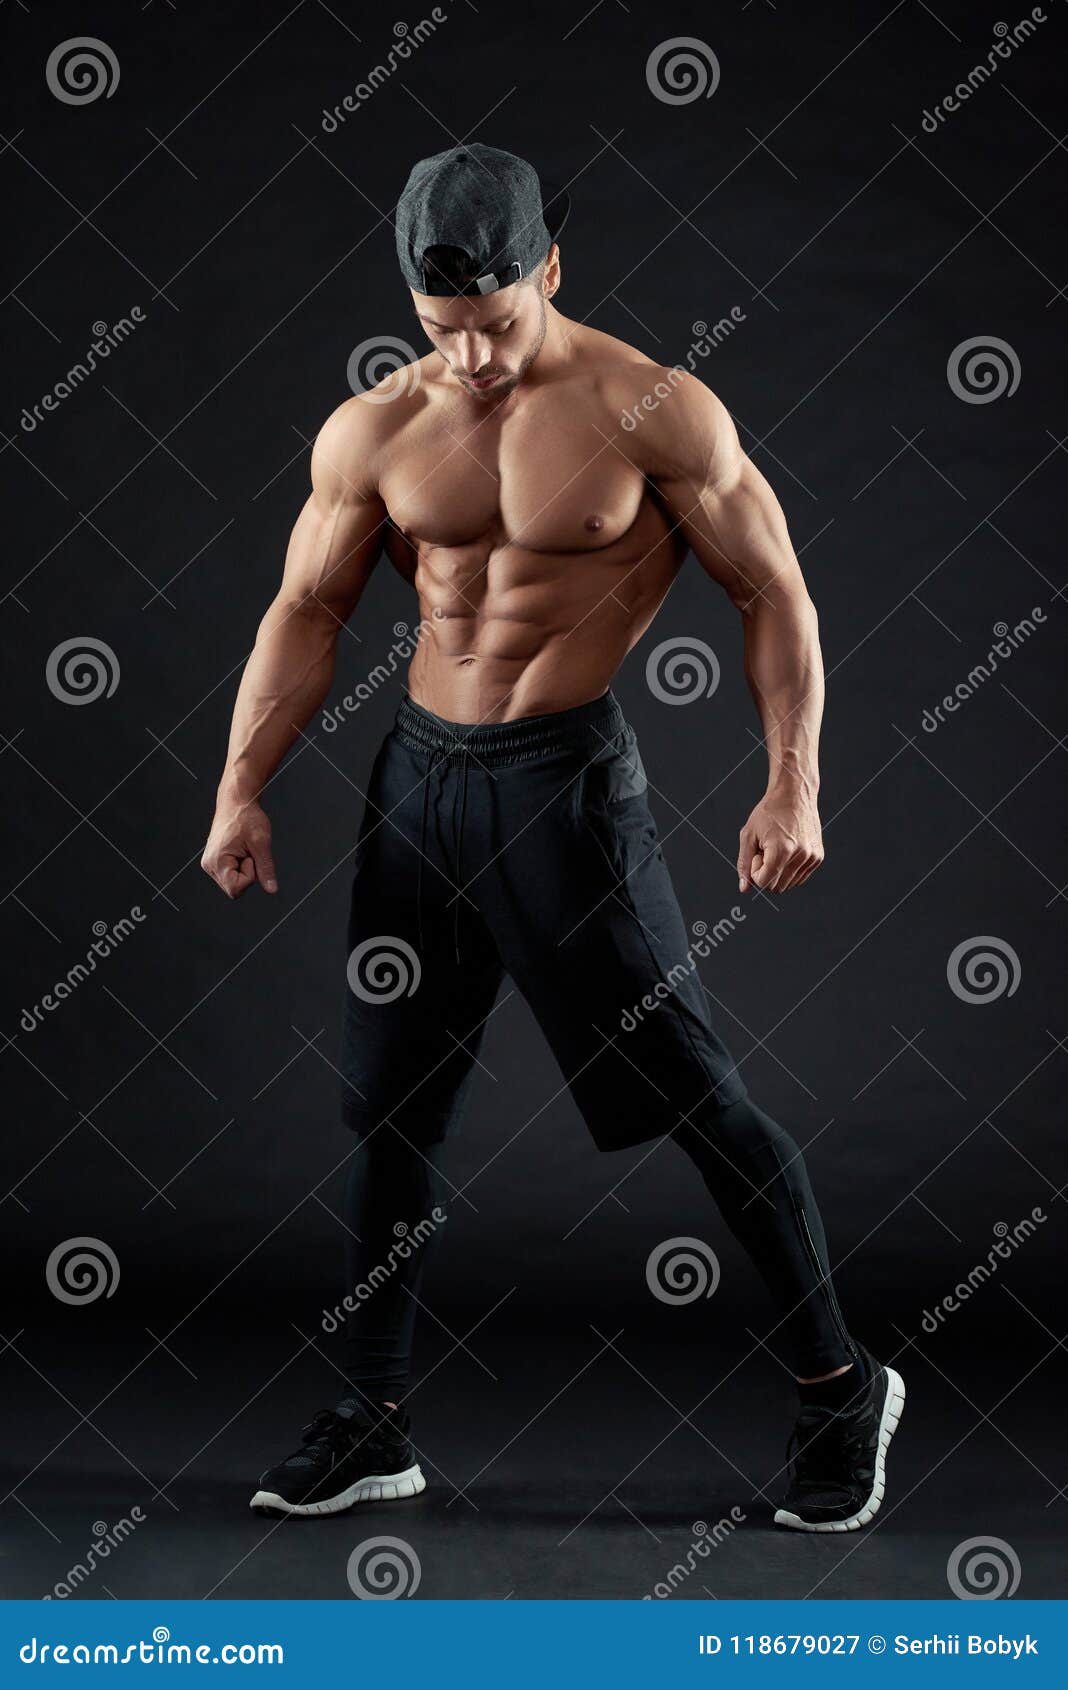 View Of A Muscled Man On A Black Background In Artistic, Fitness And Bodybuilding  Poses. Stock Photo, Picture and Royalty Free Image. Image 17489185.